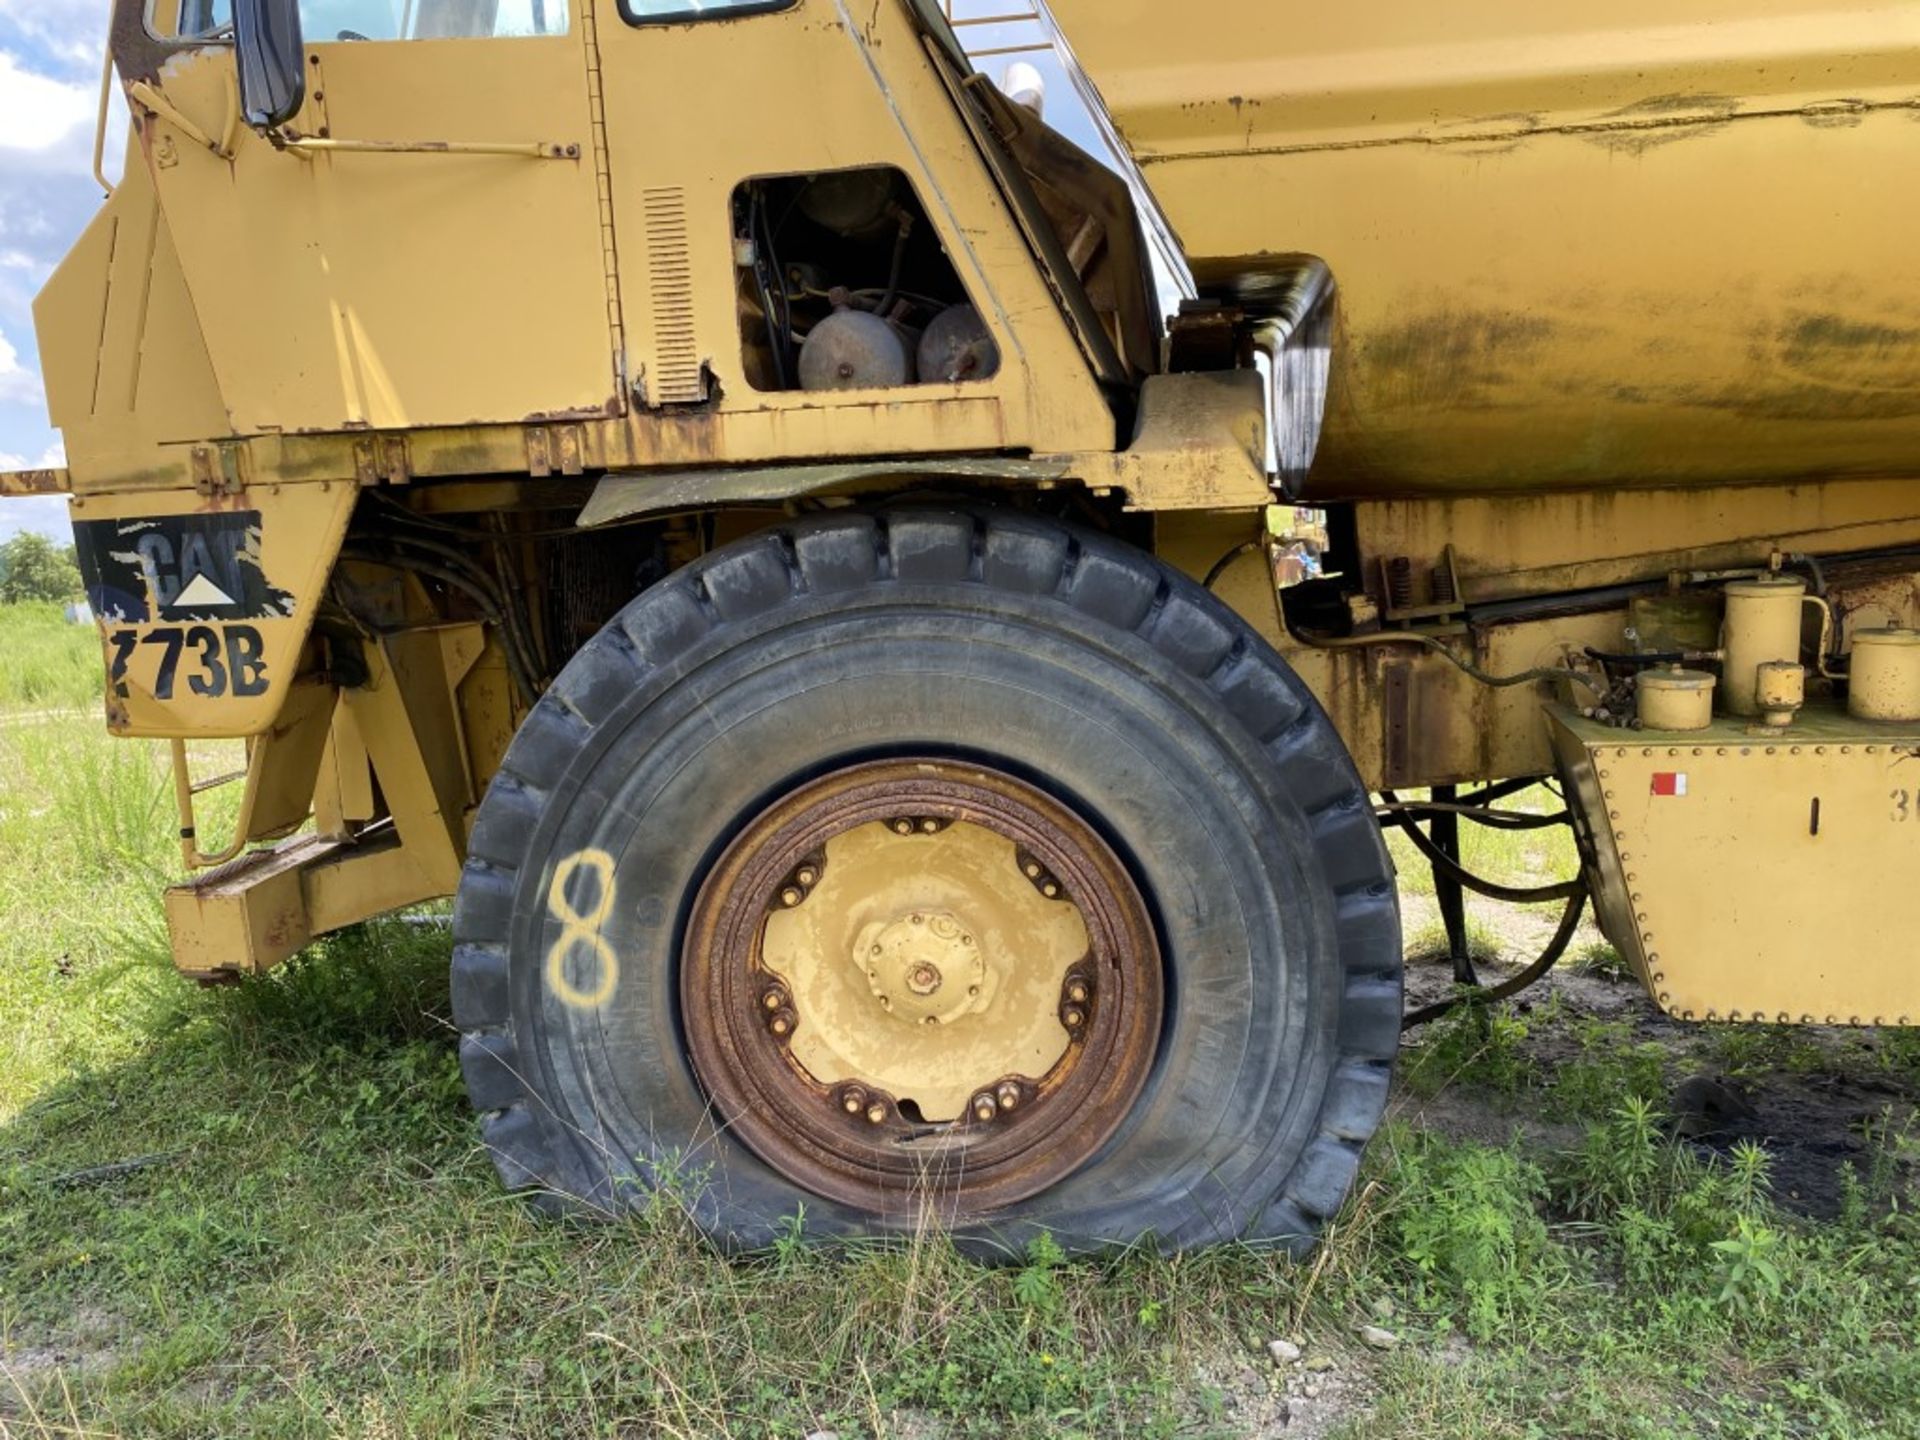 CATERPILLAR 773B OFF-ROAD WATER TRUCK, S/N: 63W00366, CAT 12-CYLINDER DIESEL ENGINE, 24.00-35 TIRES, - Image 9 of 10